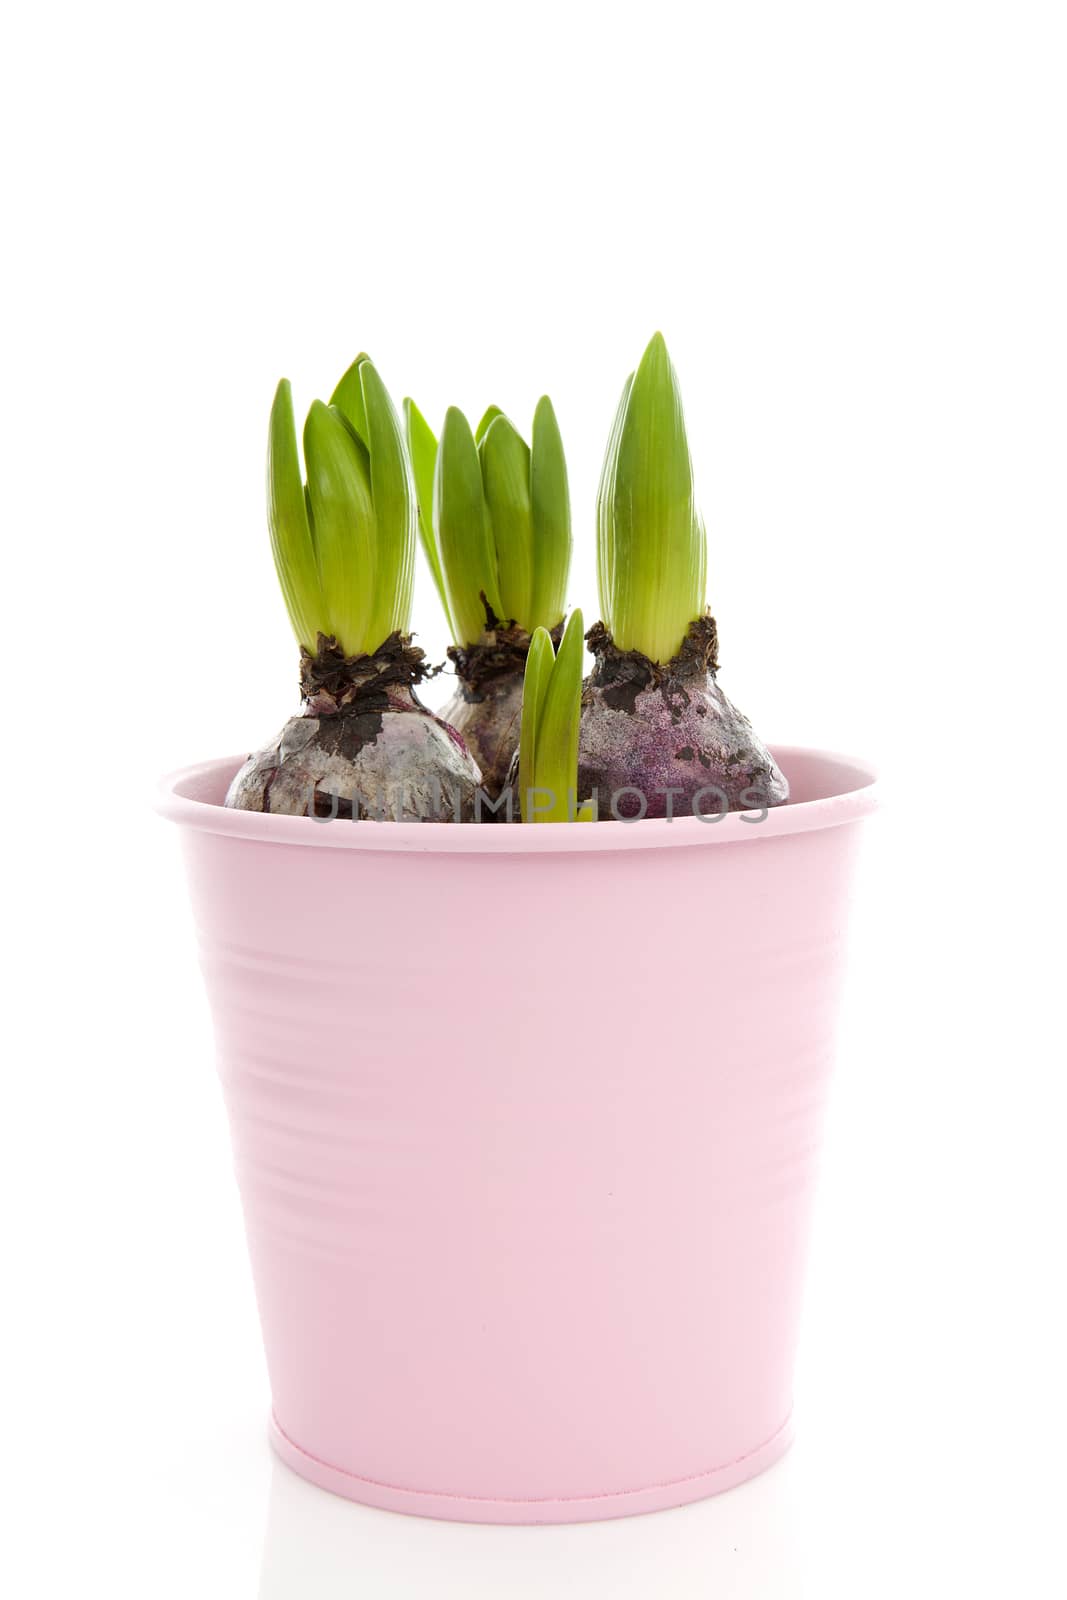 Bud of hyacinth flower in pink pot over white background 